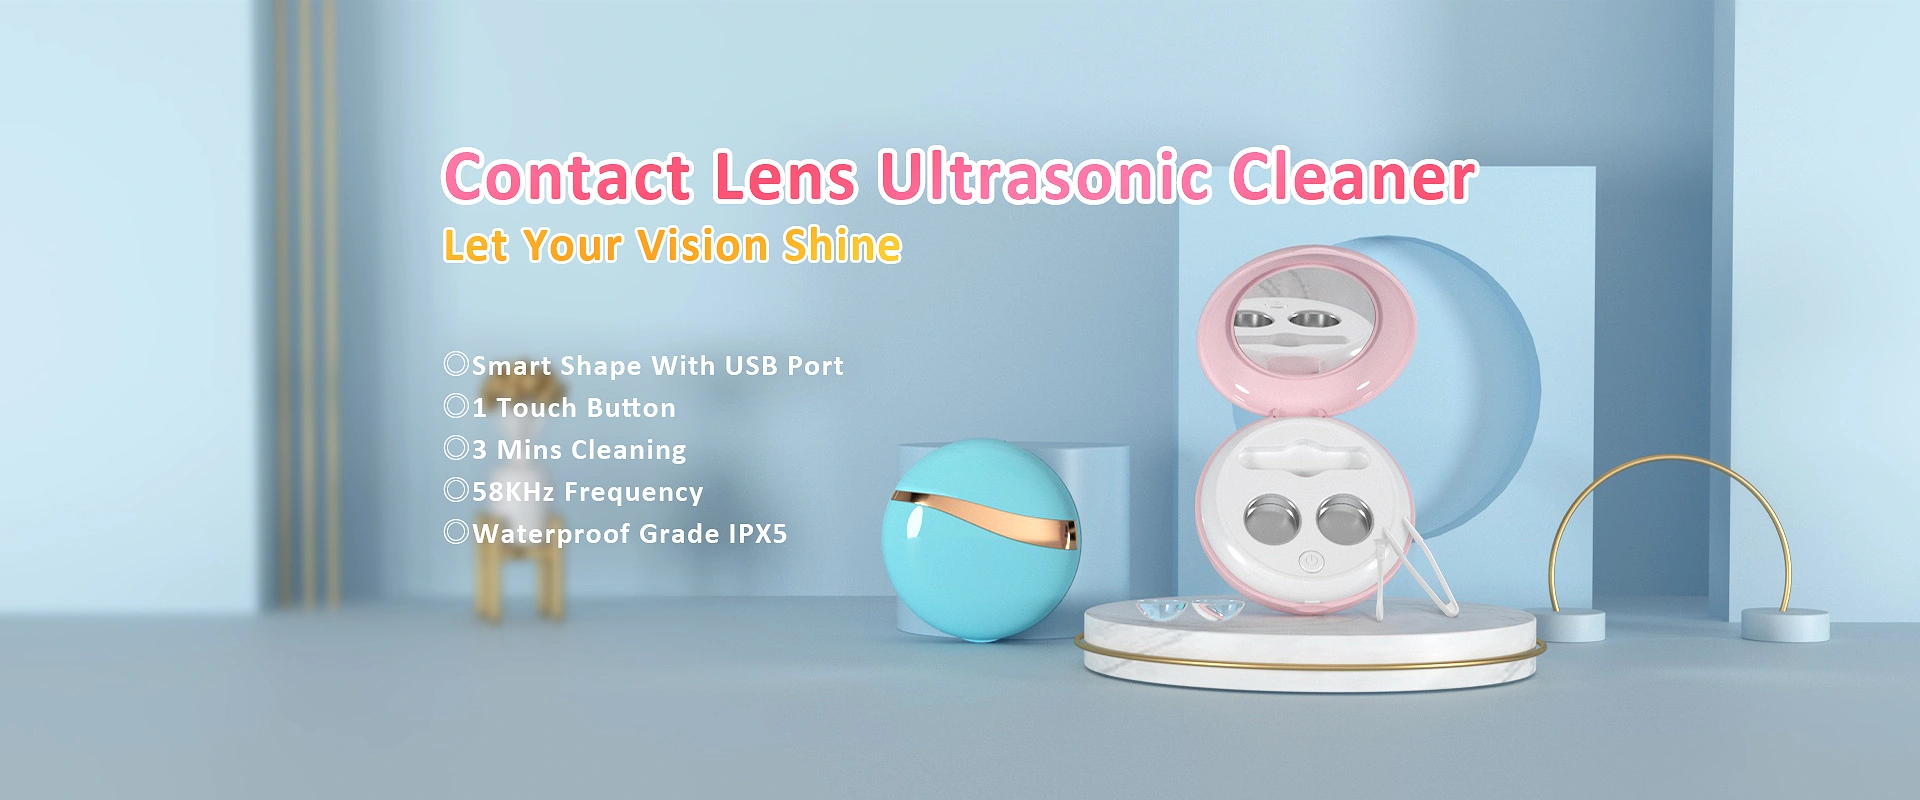 Ultrasonic Cleaner for Contact Lenses